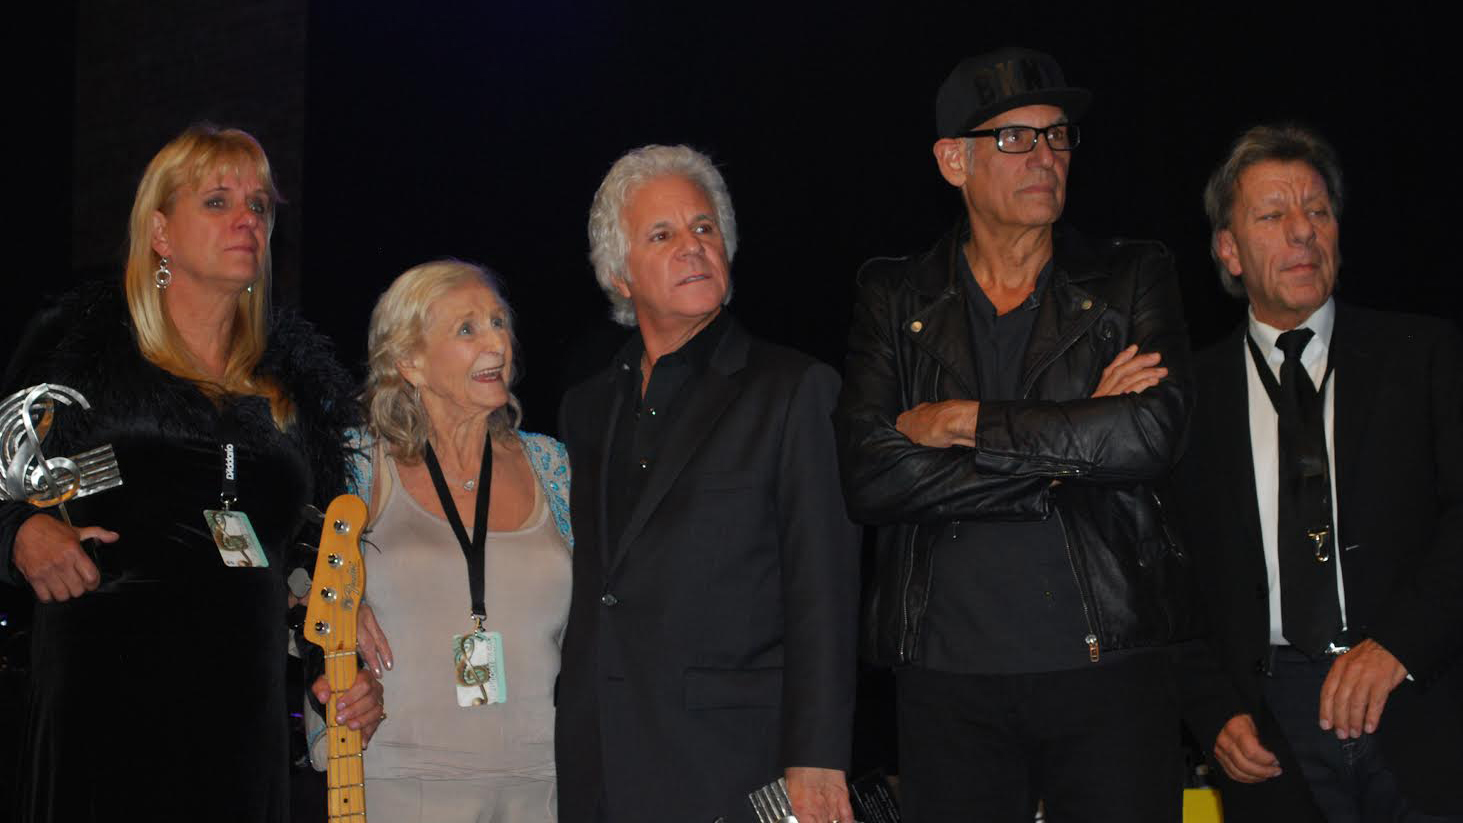 Family members of late Billy Joel Band bassist Doug Stegmeyer (holding his bass) stand alongside BJB guitarist Russell Javors, drummer Liberty DeVitto and saxophonist Richie Cannata onstage at The Paramount in Huntington Thursday, Oct. 23, 2014 at the group's induction into the Long Island Music Hall of Fame. (Christopher Twarowski / Long Island Press)